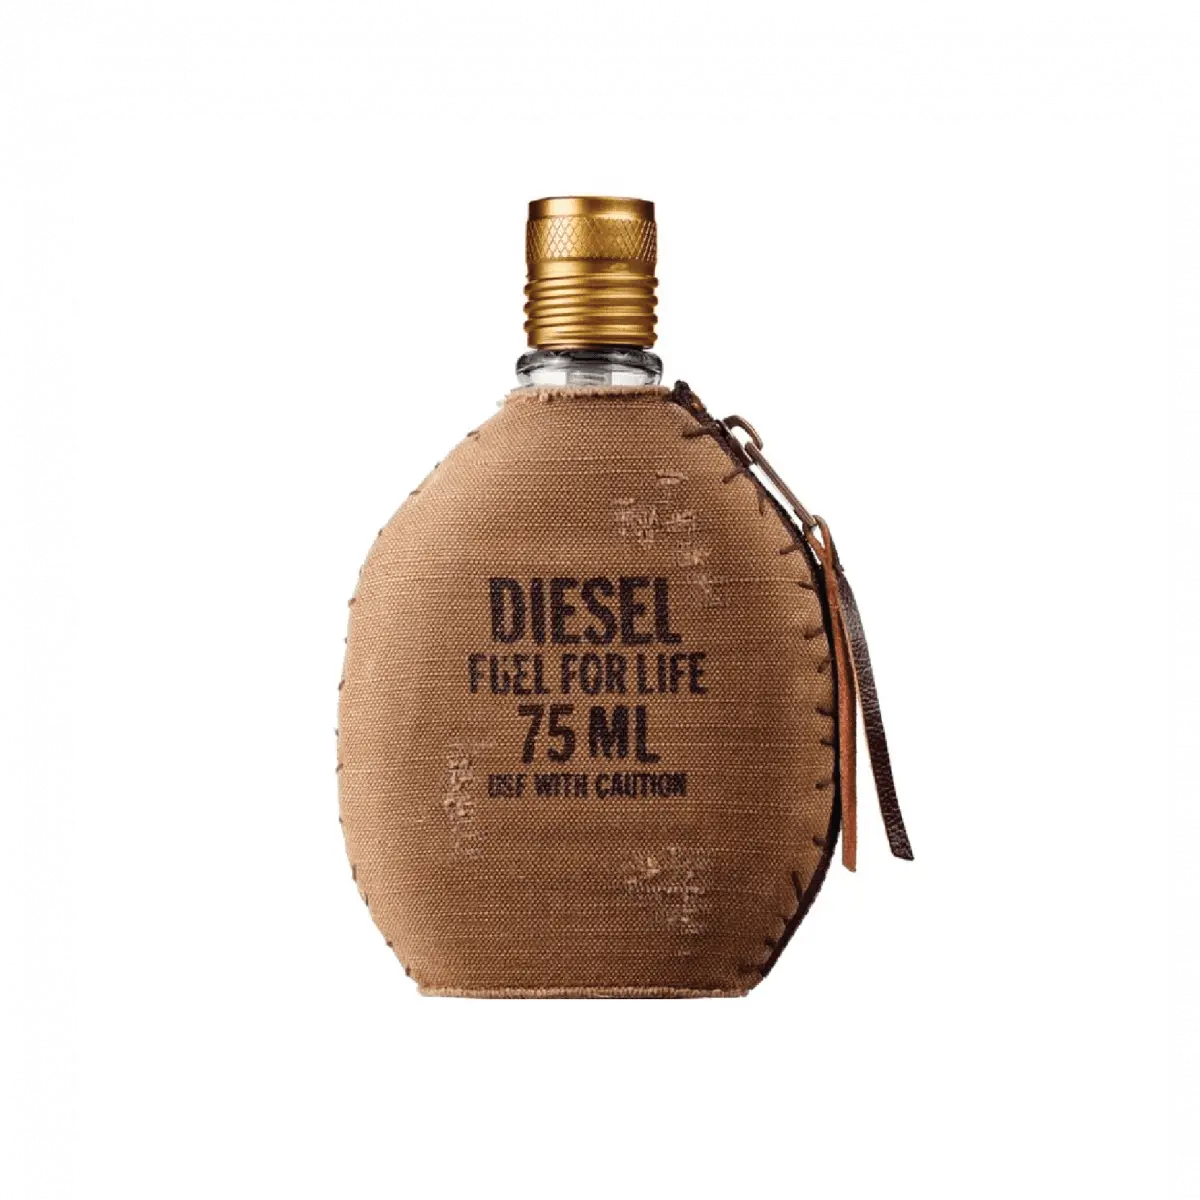 Hình 1 - Diesel Fuel For Life Use With Caution EDT 75ml